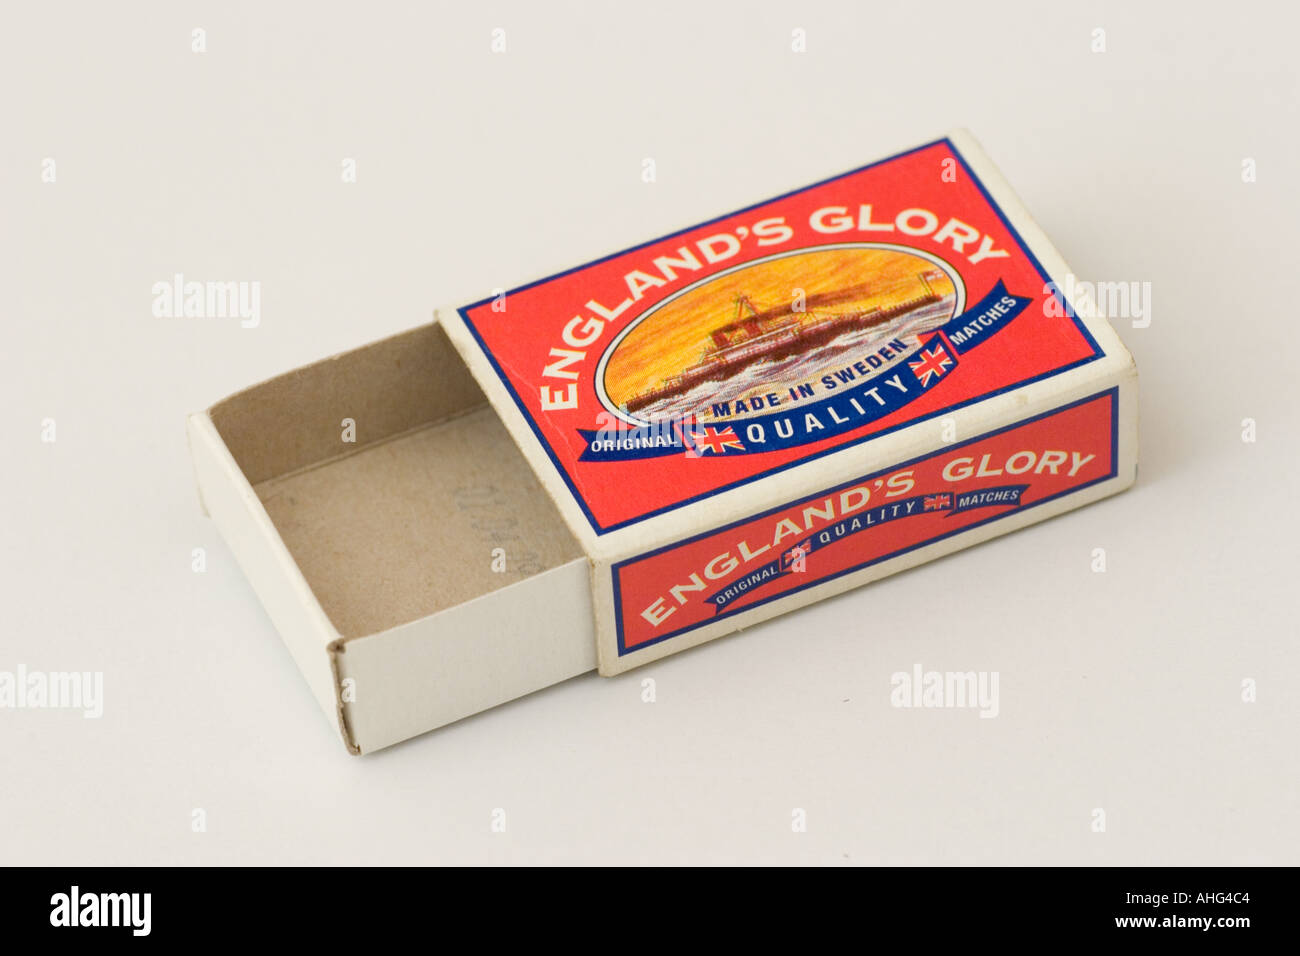 Empty box of safety matches Stock Photo